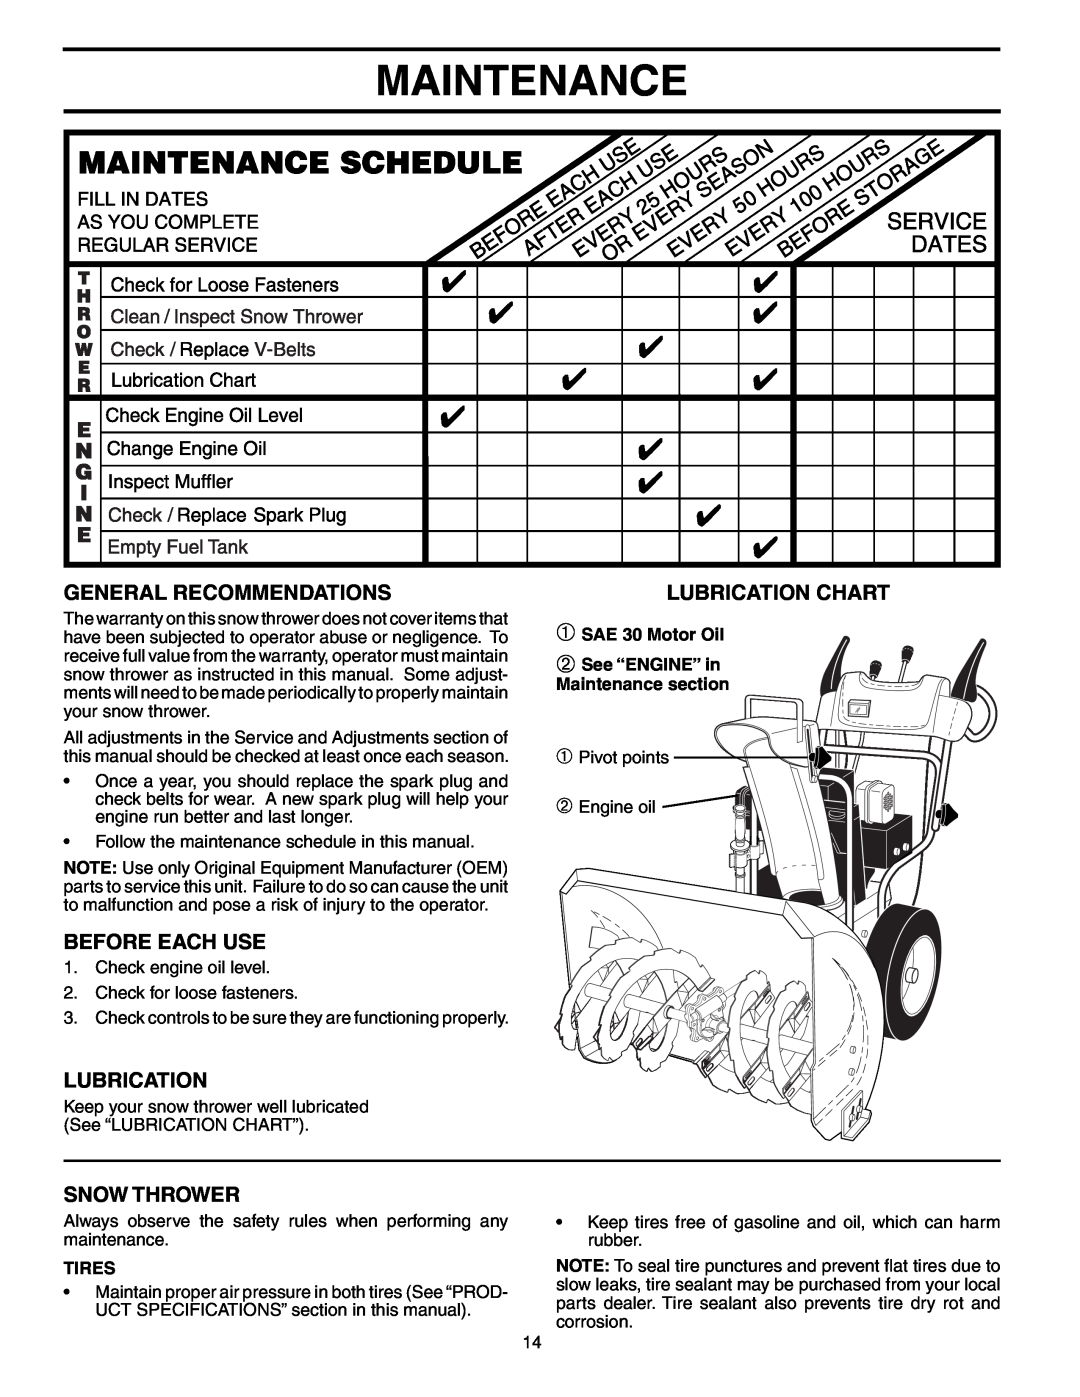 Poulan 192038 owner manual Maintenance, General Recommendations, Before Each Use, Snow Thrower, Lubrication Chart 